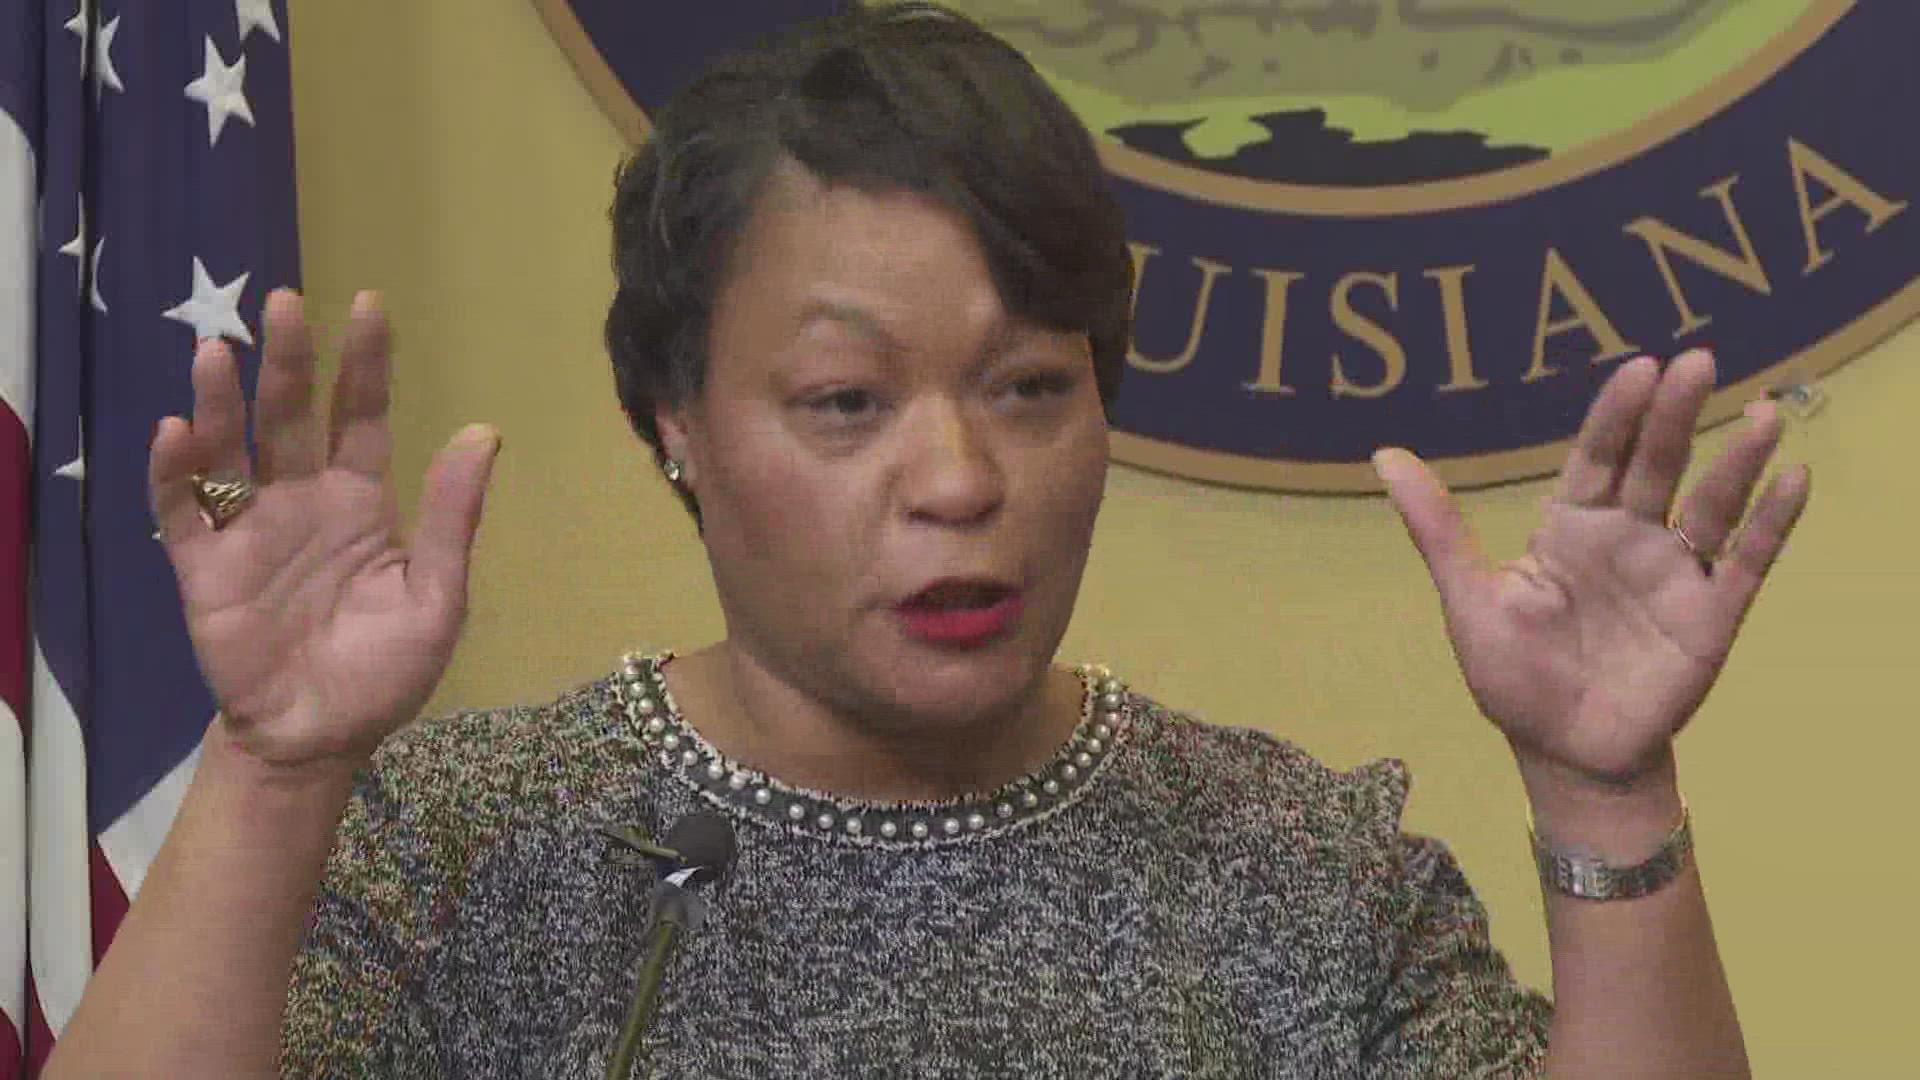 Mayor LaToya Cantrell said she acted as a peacemaker in the incident caught on video in a ladies' restroom over the weekend.